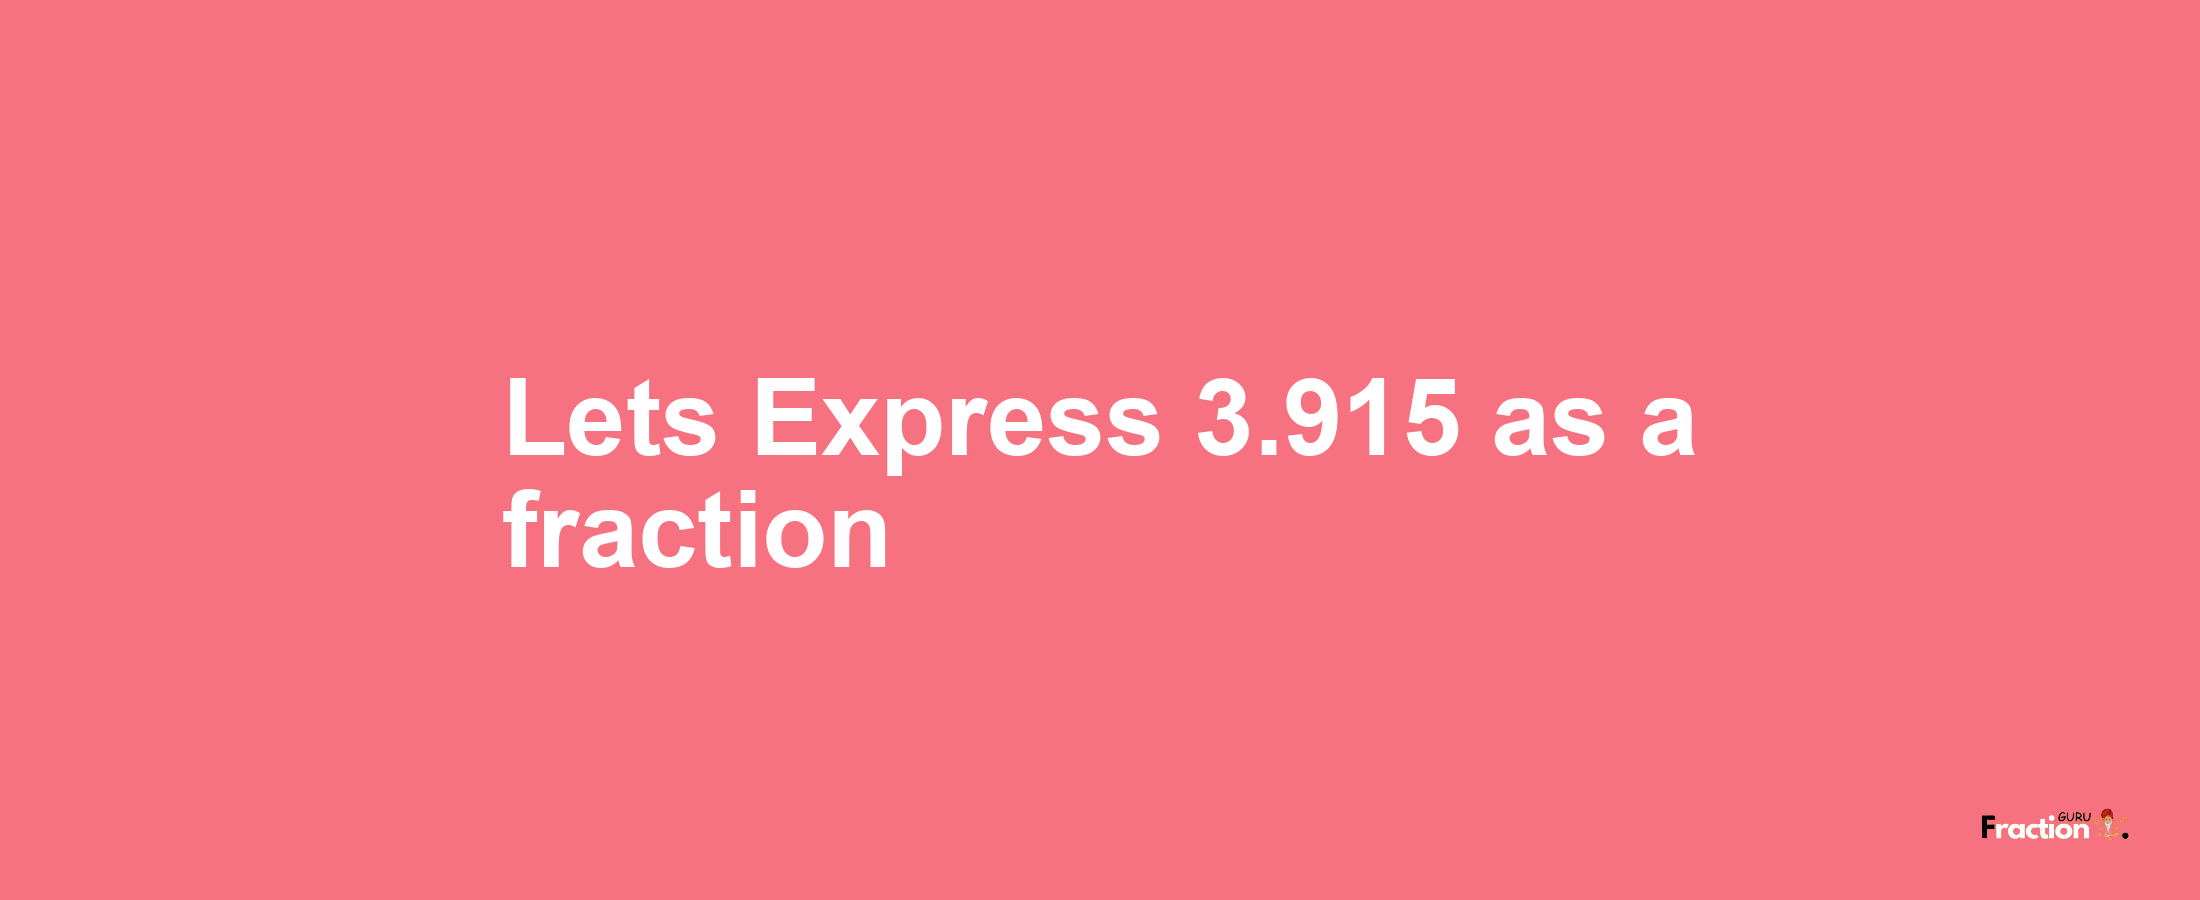 Lets Express 3.915 as afraction